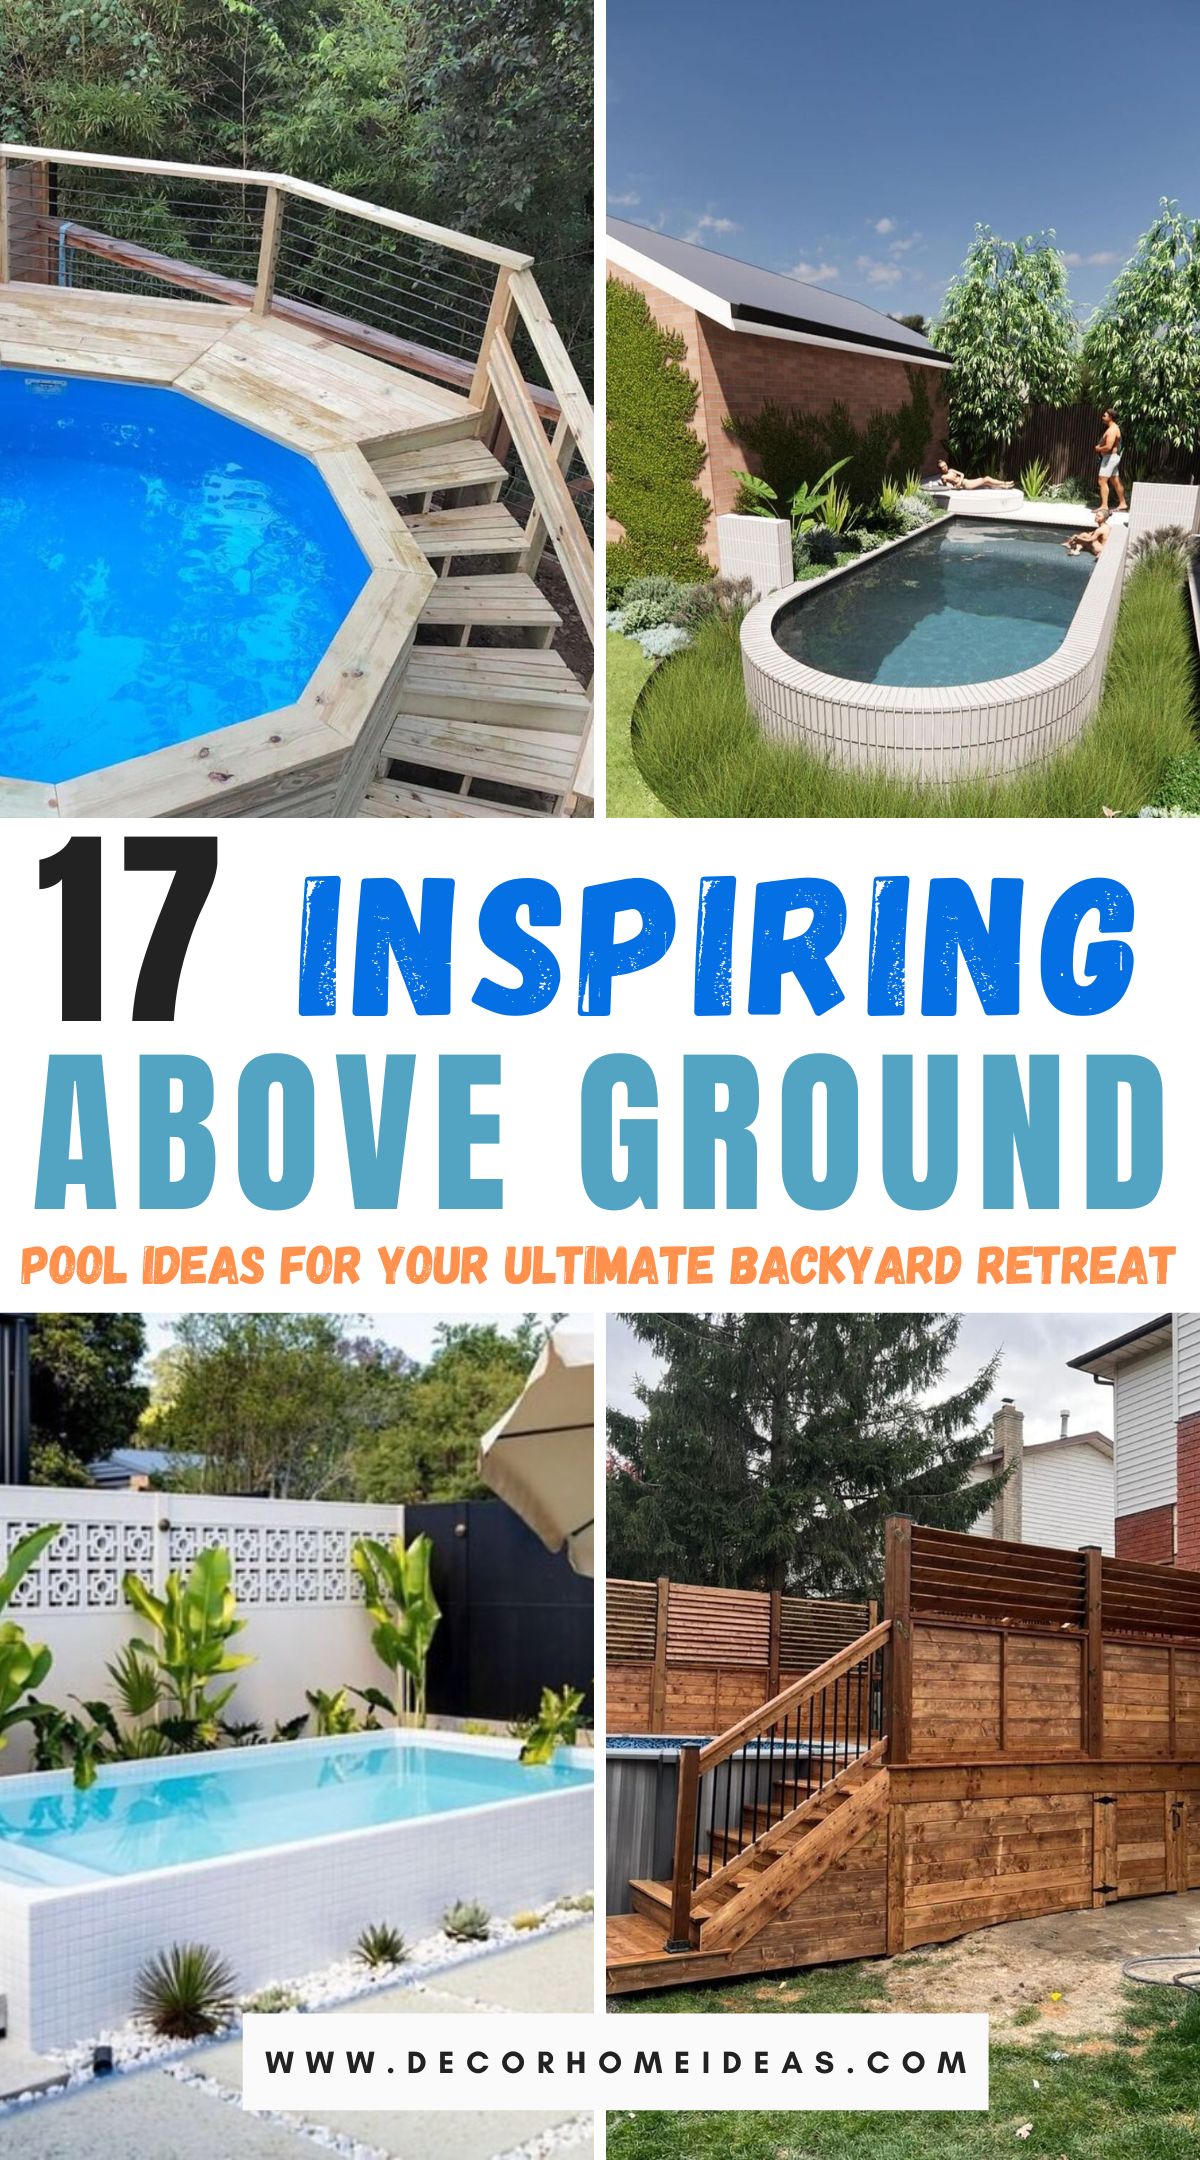 Transform your backyard into a luxurious oasis with these 17 stunning above ground pool ideas. From modern designs to tropical paradises, find inspiration to create your perfect outdoor retreat.